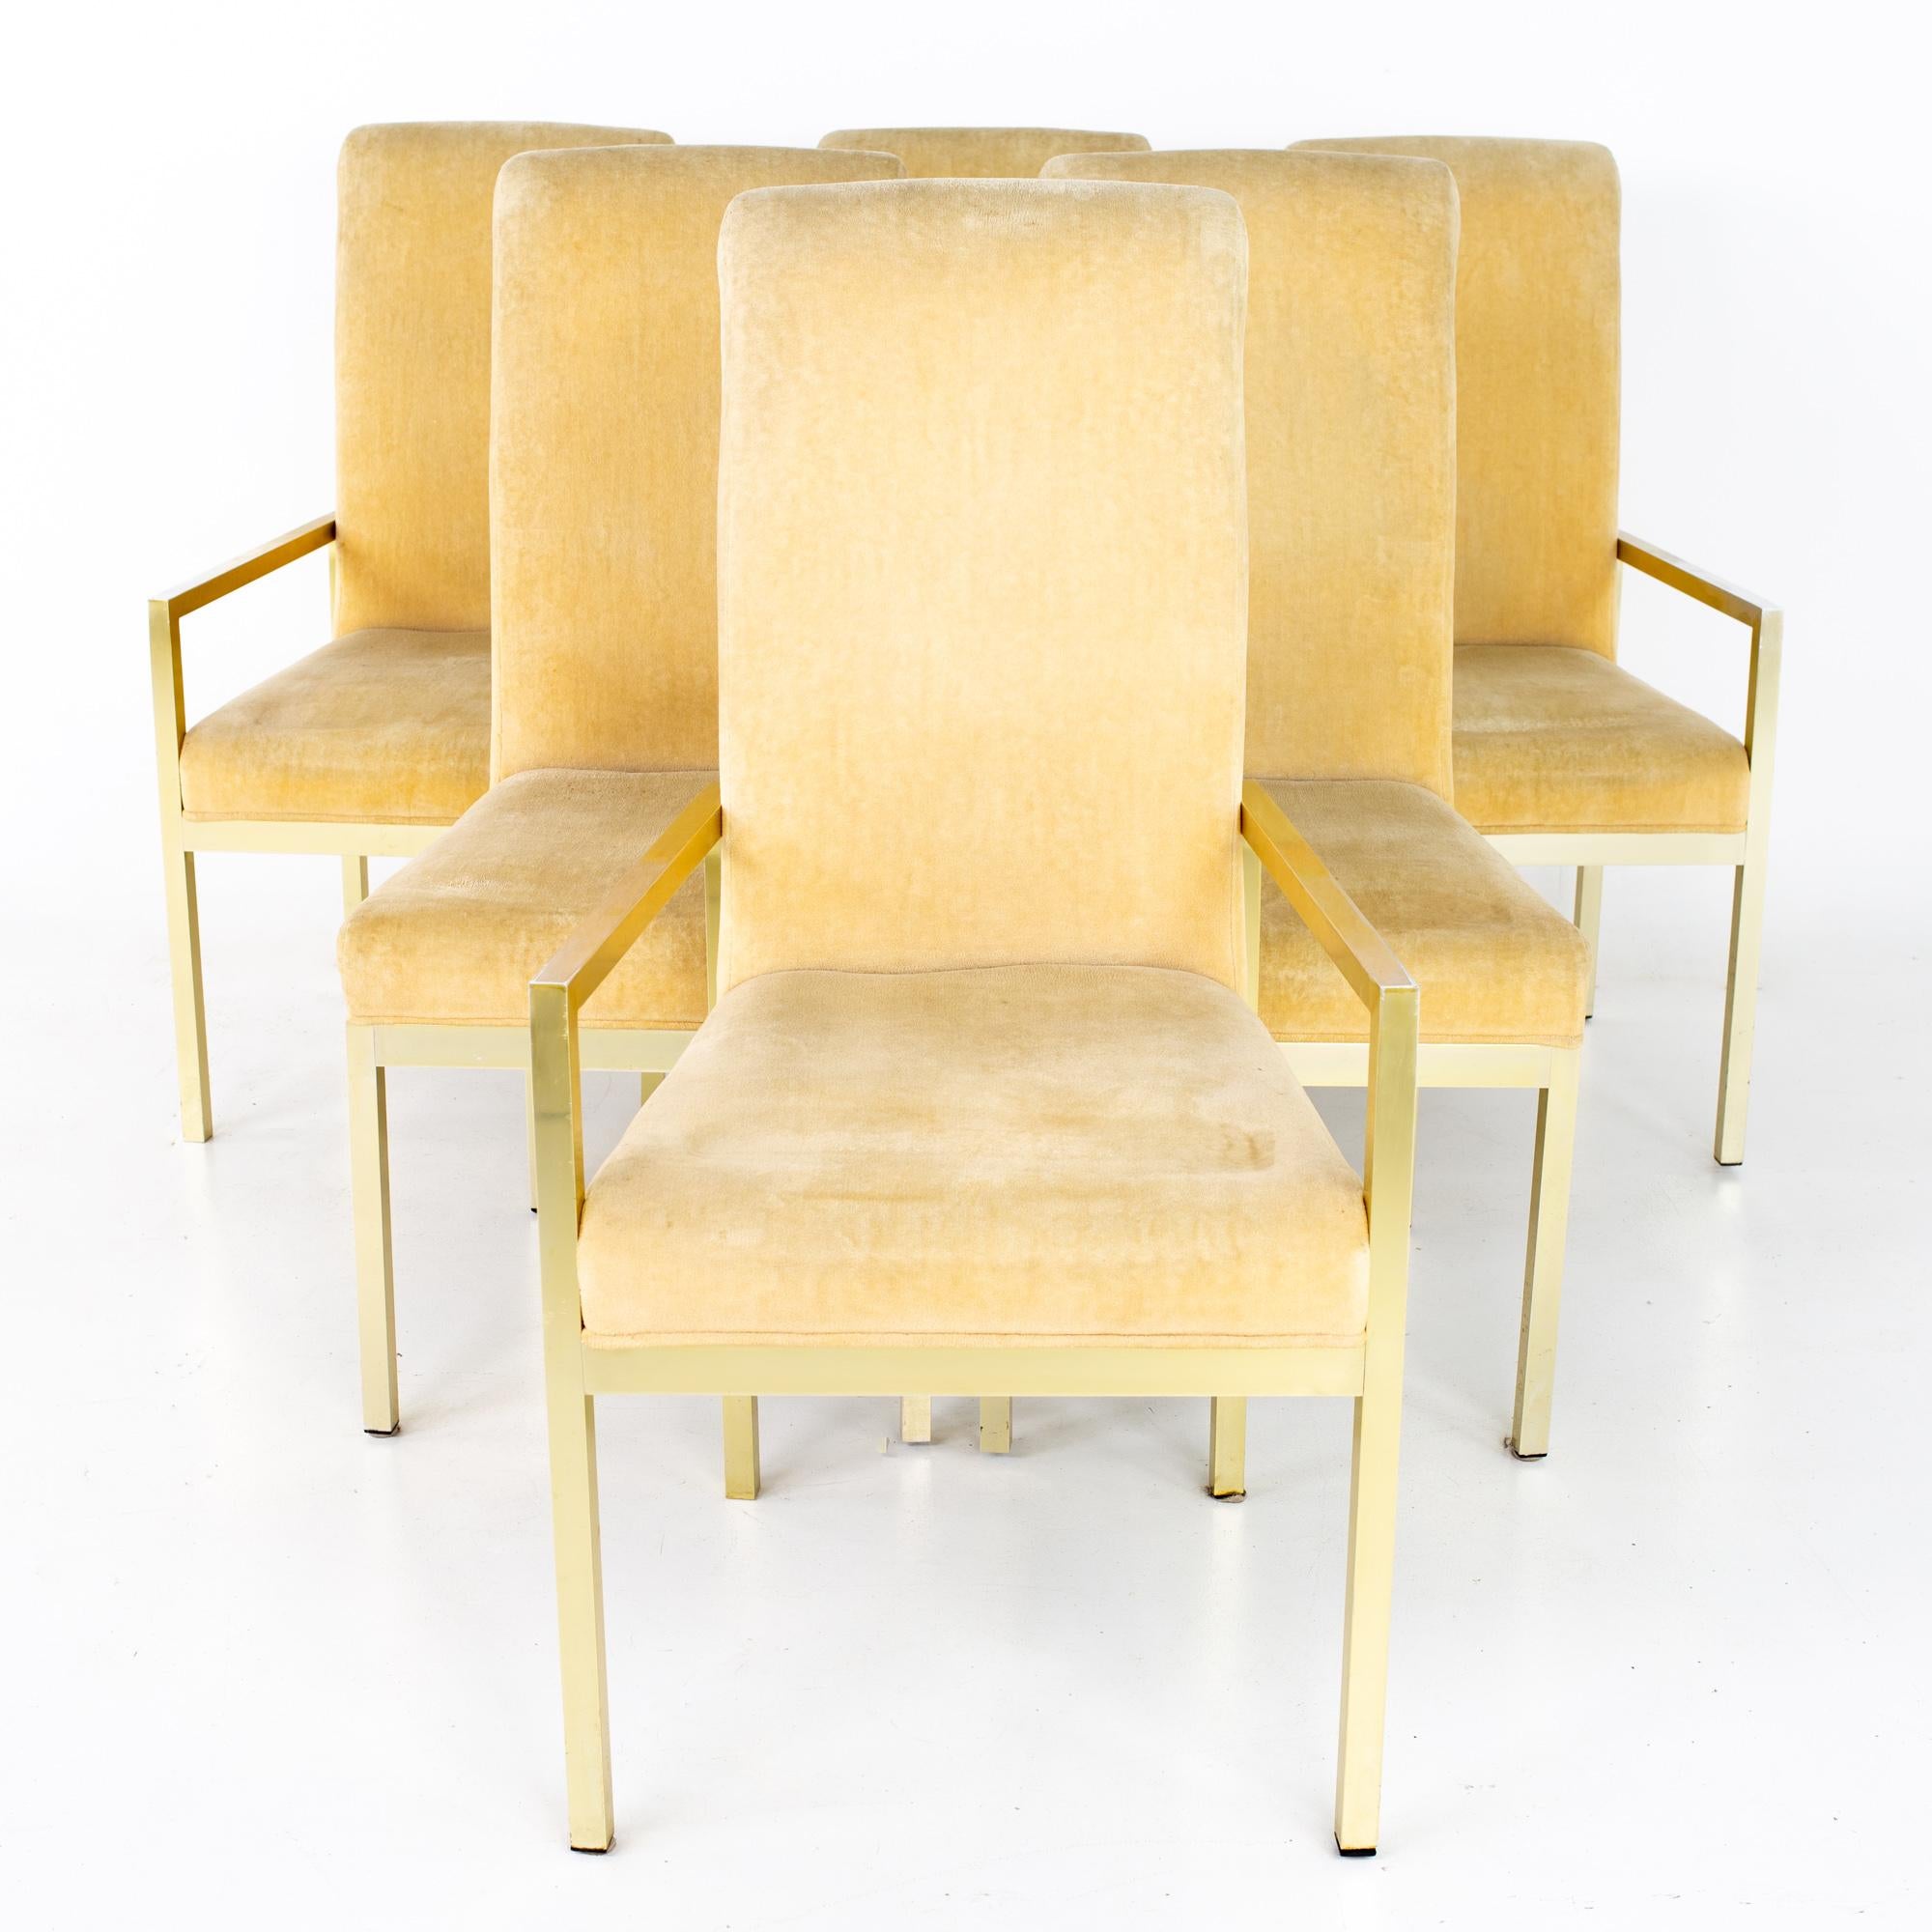 Mid-Century Modern Design Institute of America MCM Brass Dining Chairs - Set of 6 For Sale